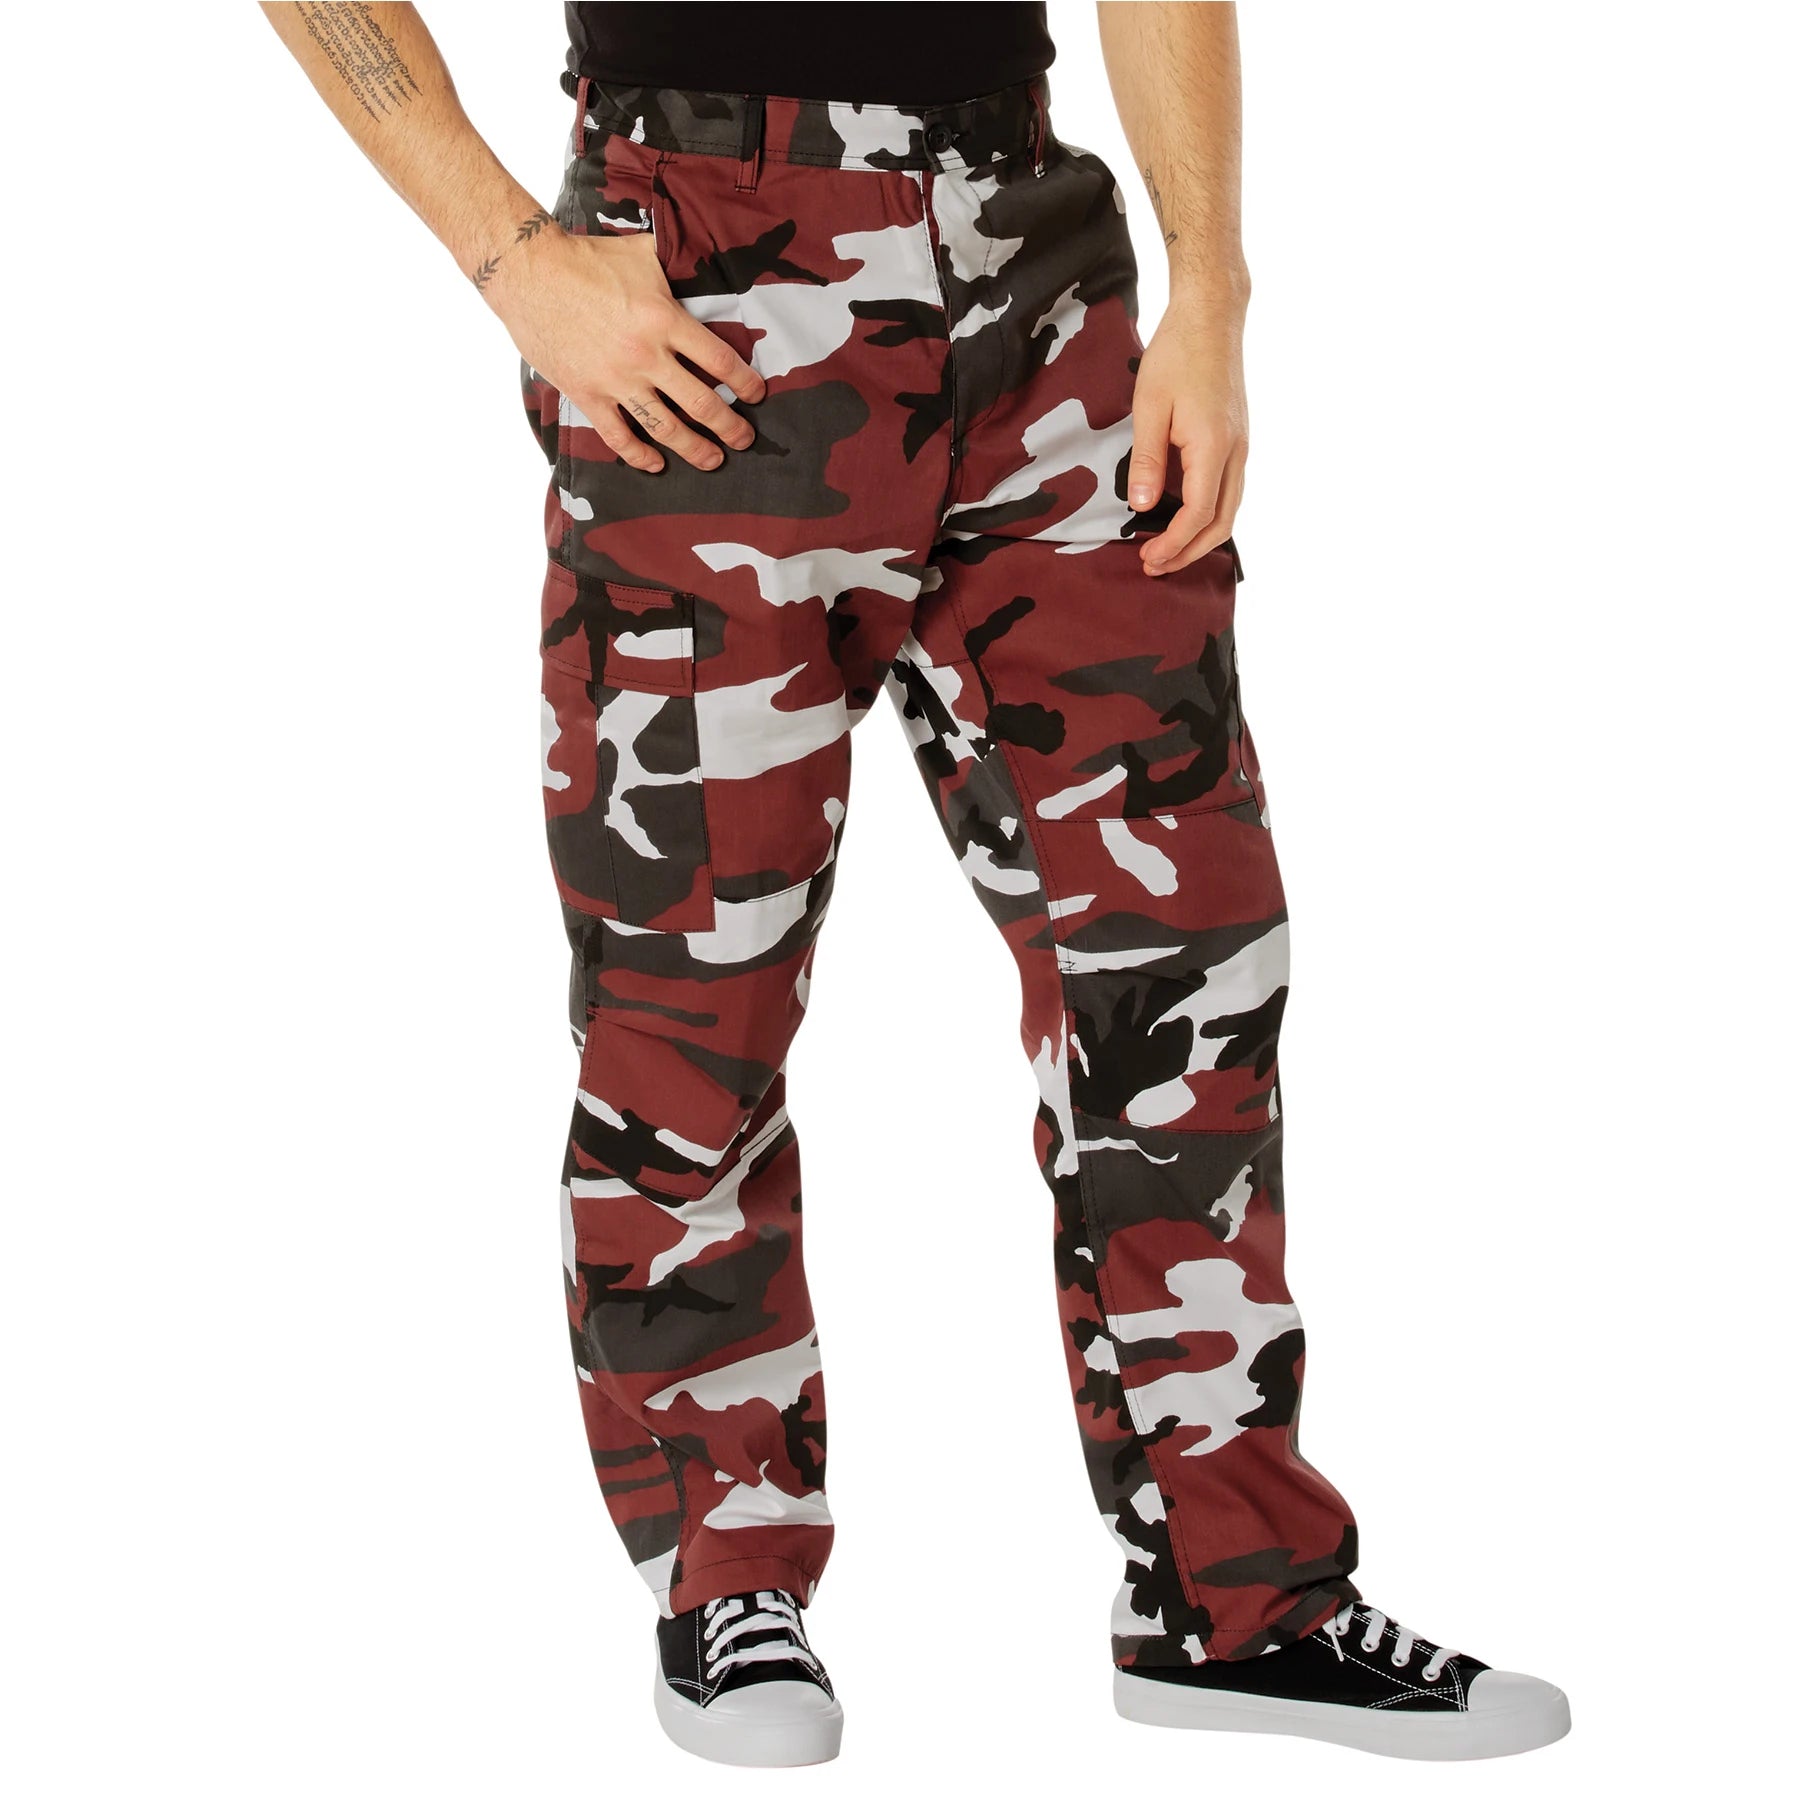 Rothco Military Cargo Pants for men